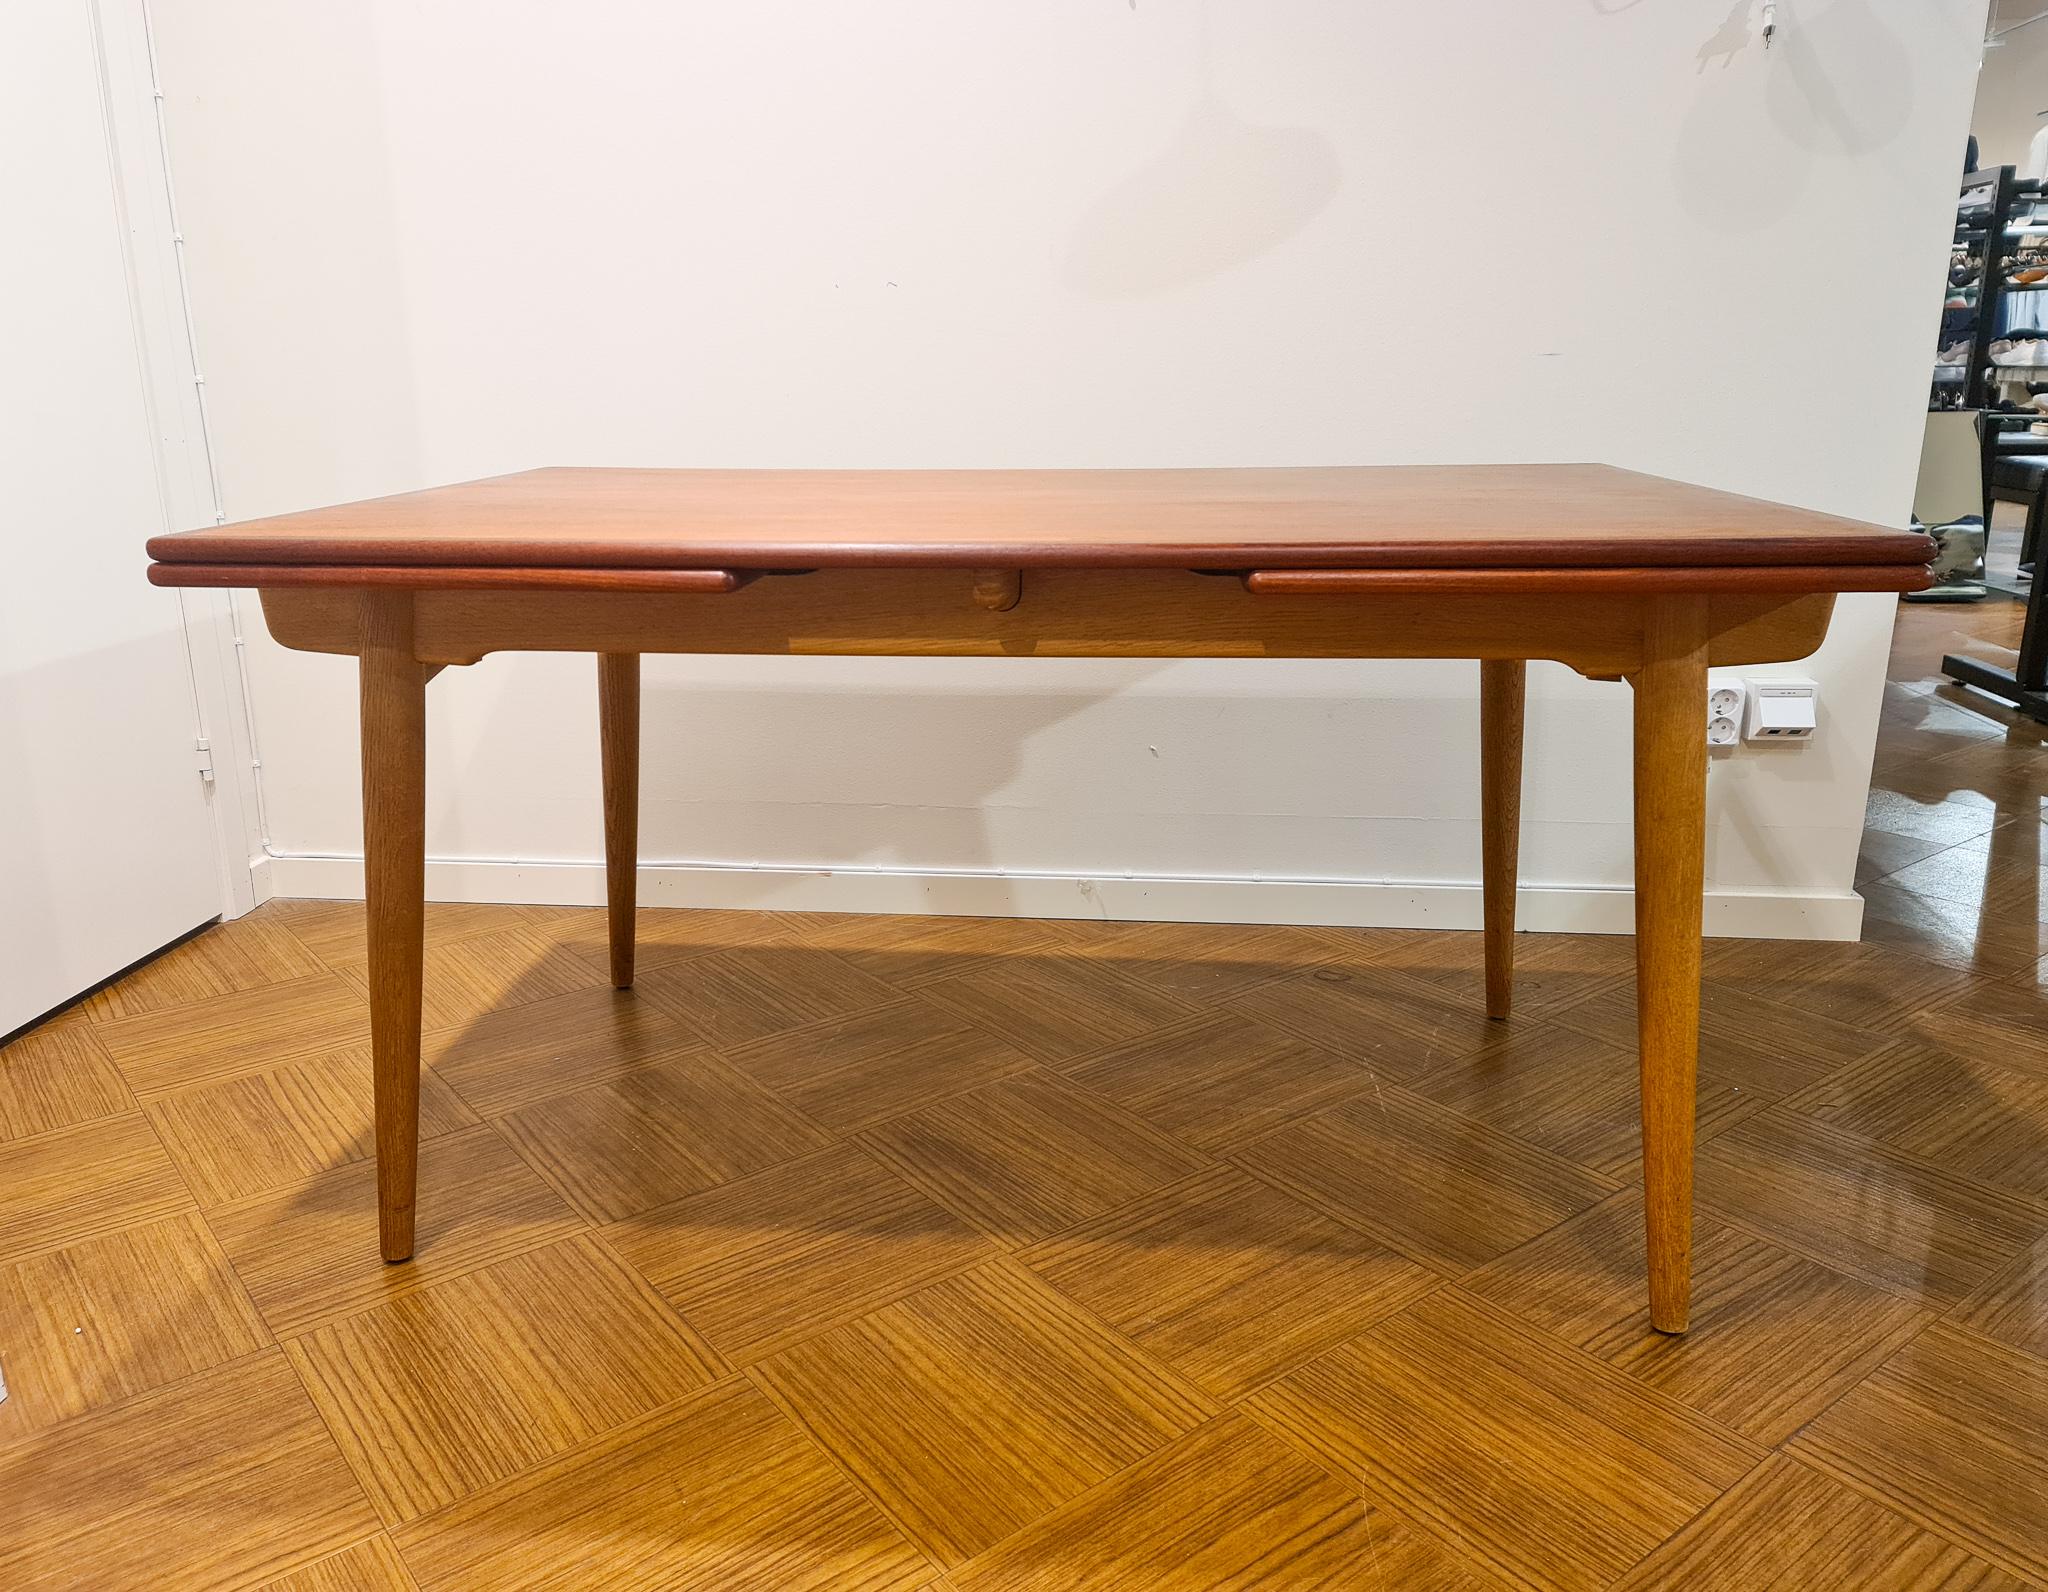 Wonderful dining table produced by Andreas Tuck and designed by Hans J Wegner in the 1950s.

The dining table has a frame of solid oak and a top of teak veneer. Two pull-out-leaves make extension possible. The two leaves hide under the top and is